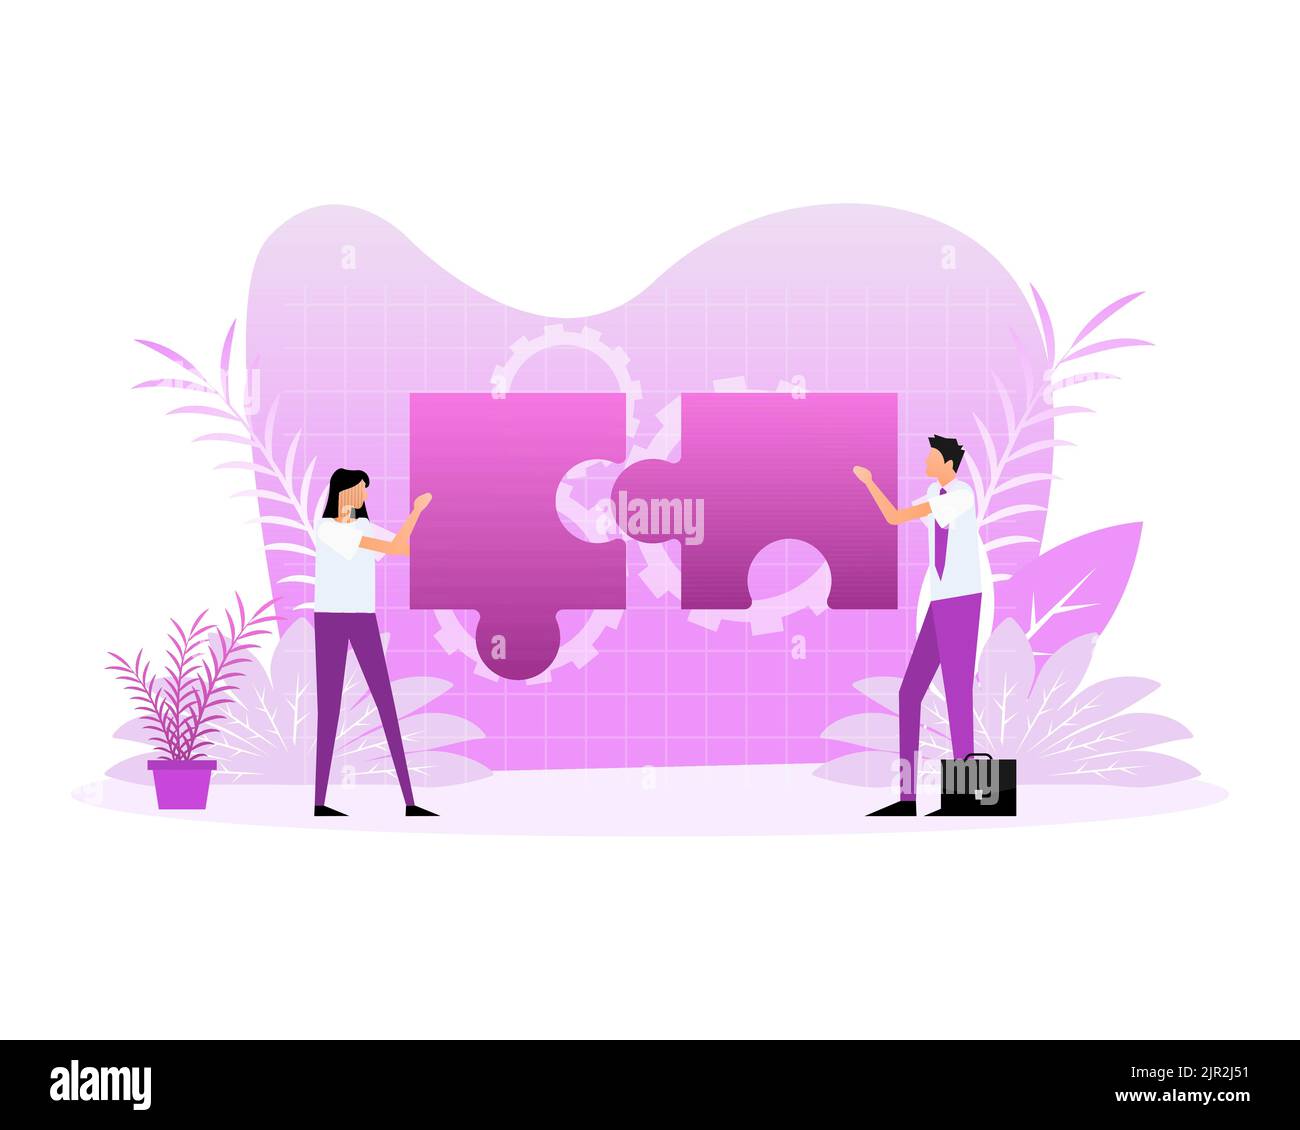 Puzzle people, great design for any purposes. Isometric vector illustration Stock Vector